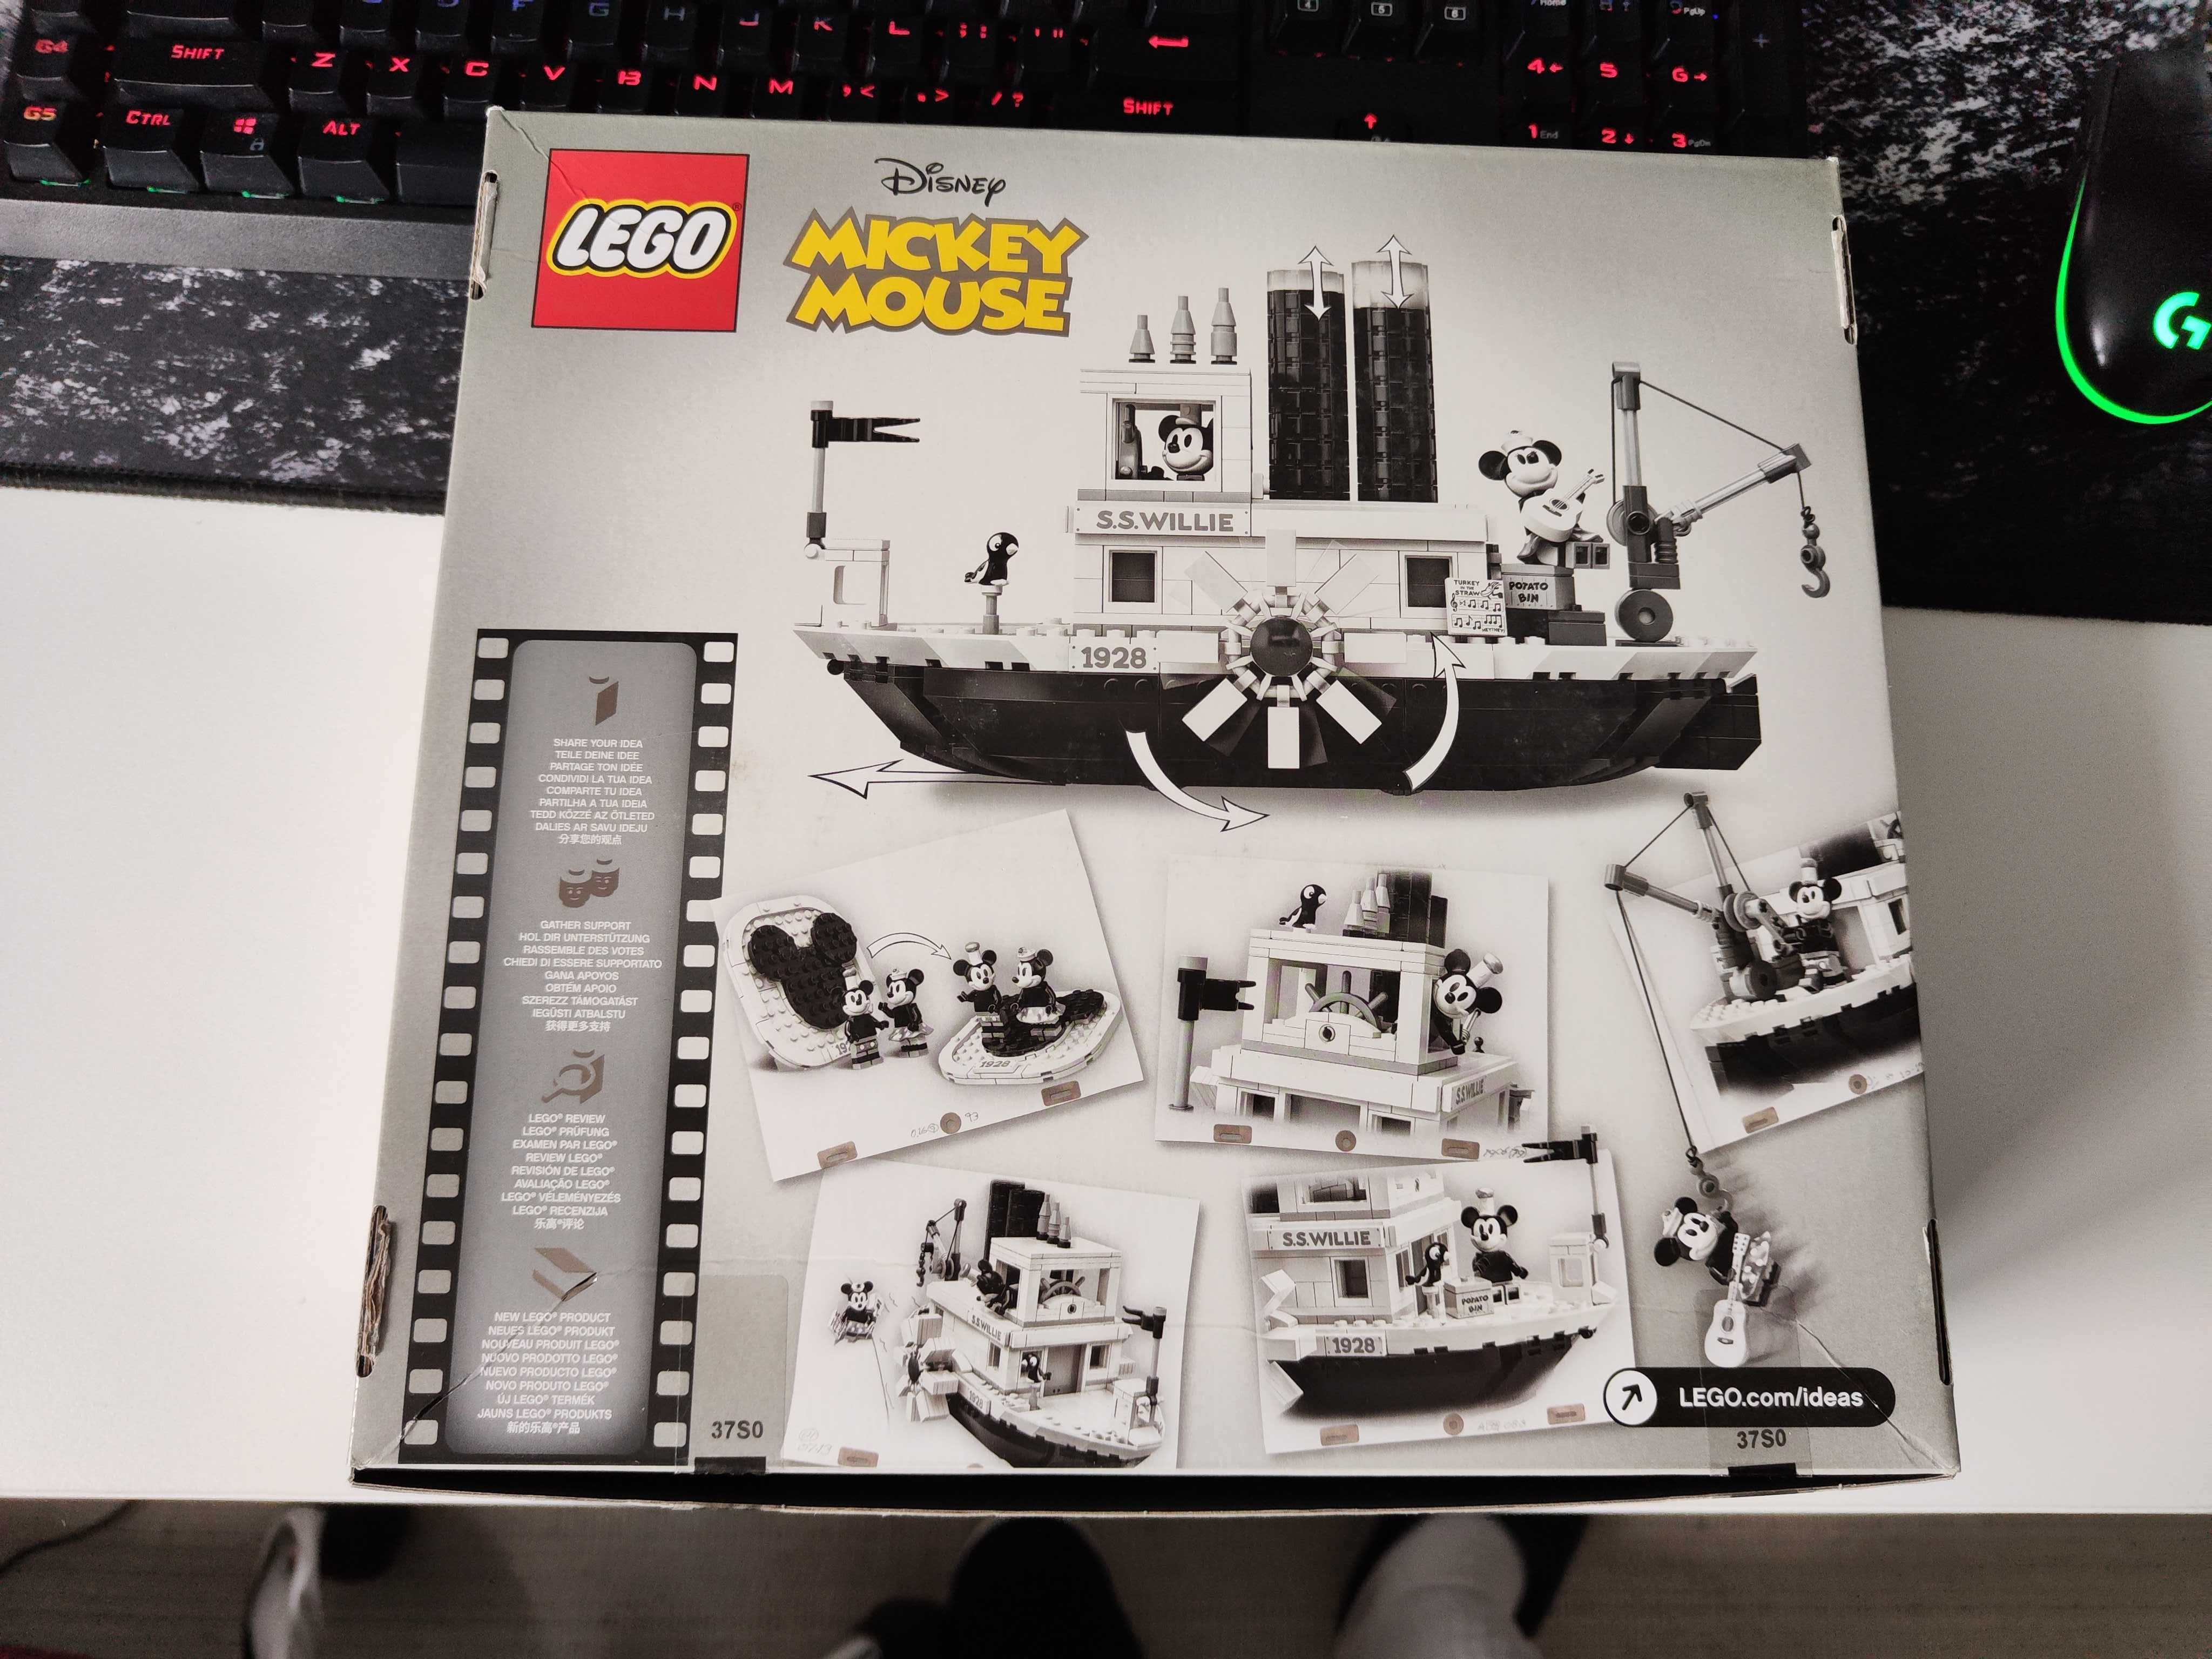 Steamboat Willie, Lego Ideas 21317 - Construit